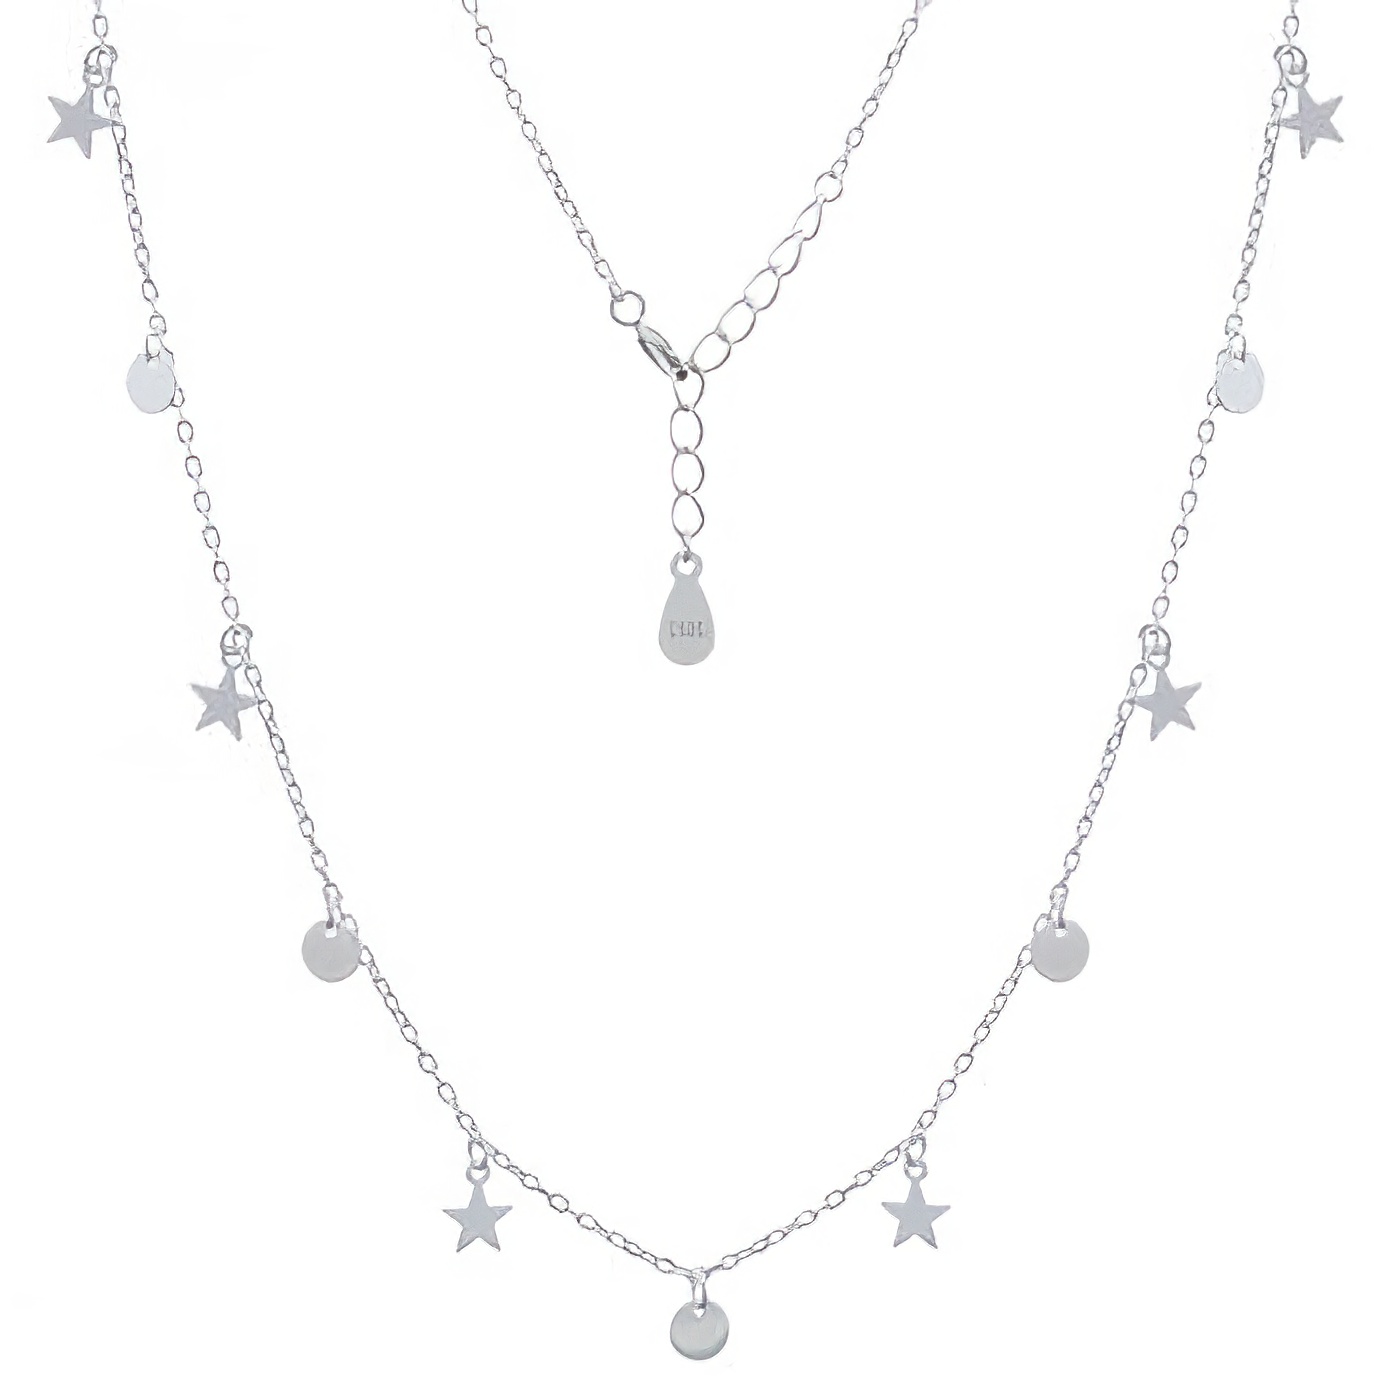 Silver Plated Star Discs 925 Chain Necklace by BeYindi 